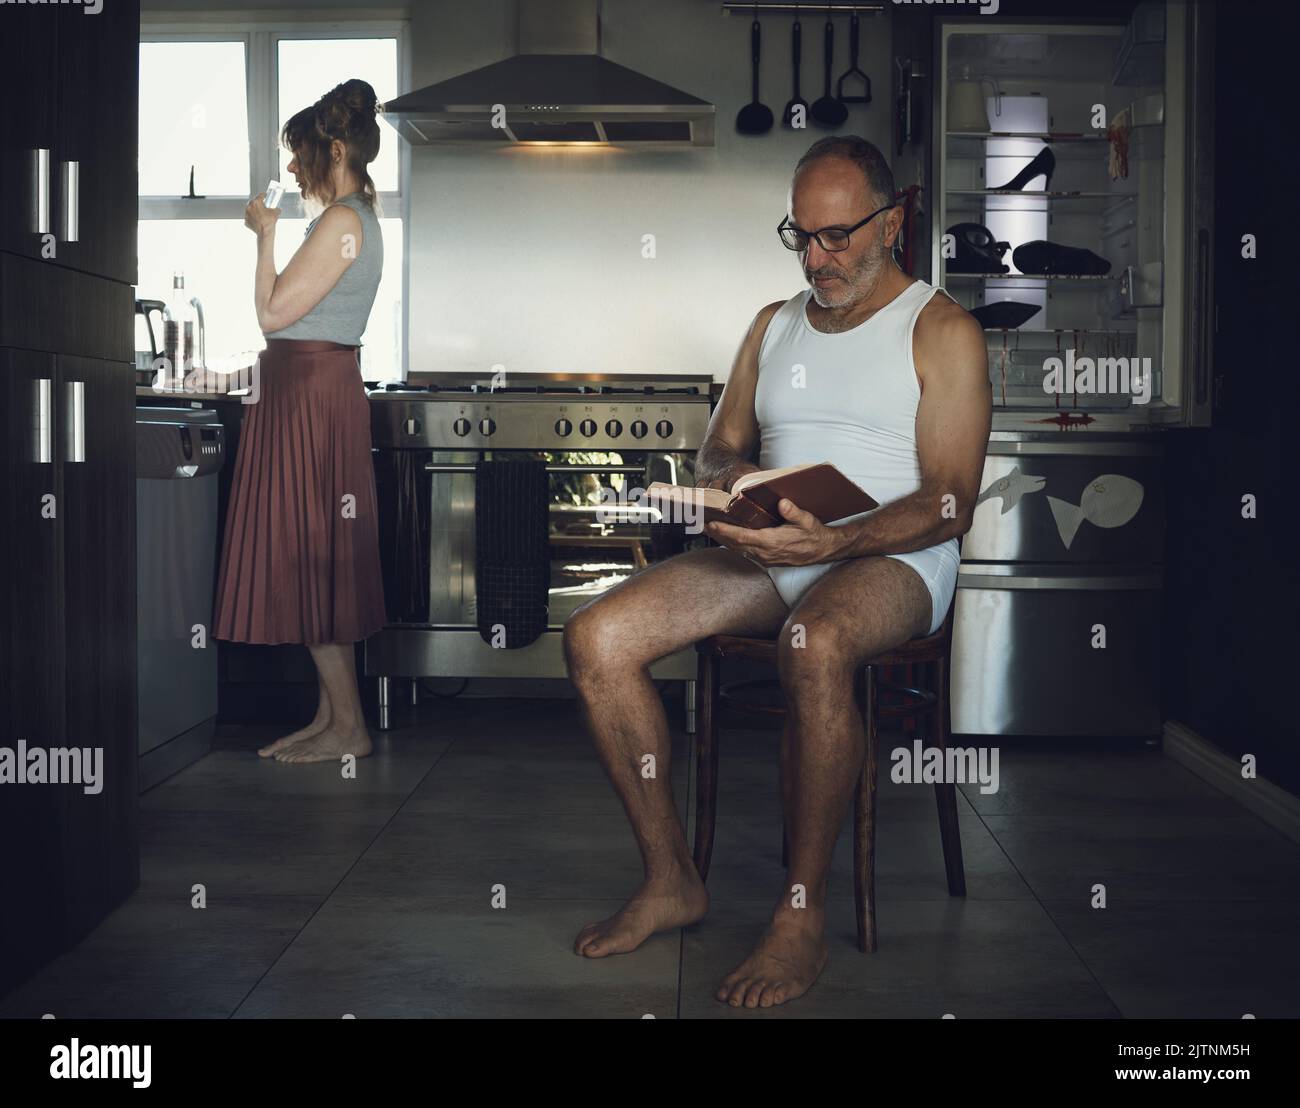 Marriage, problem and mental health issue with bored old couple in toxic, dark or sad family home kitchen together. Divorce, alcoholic and depression Stock Photo